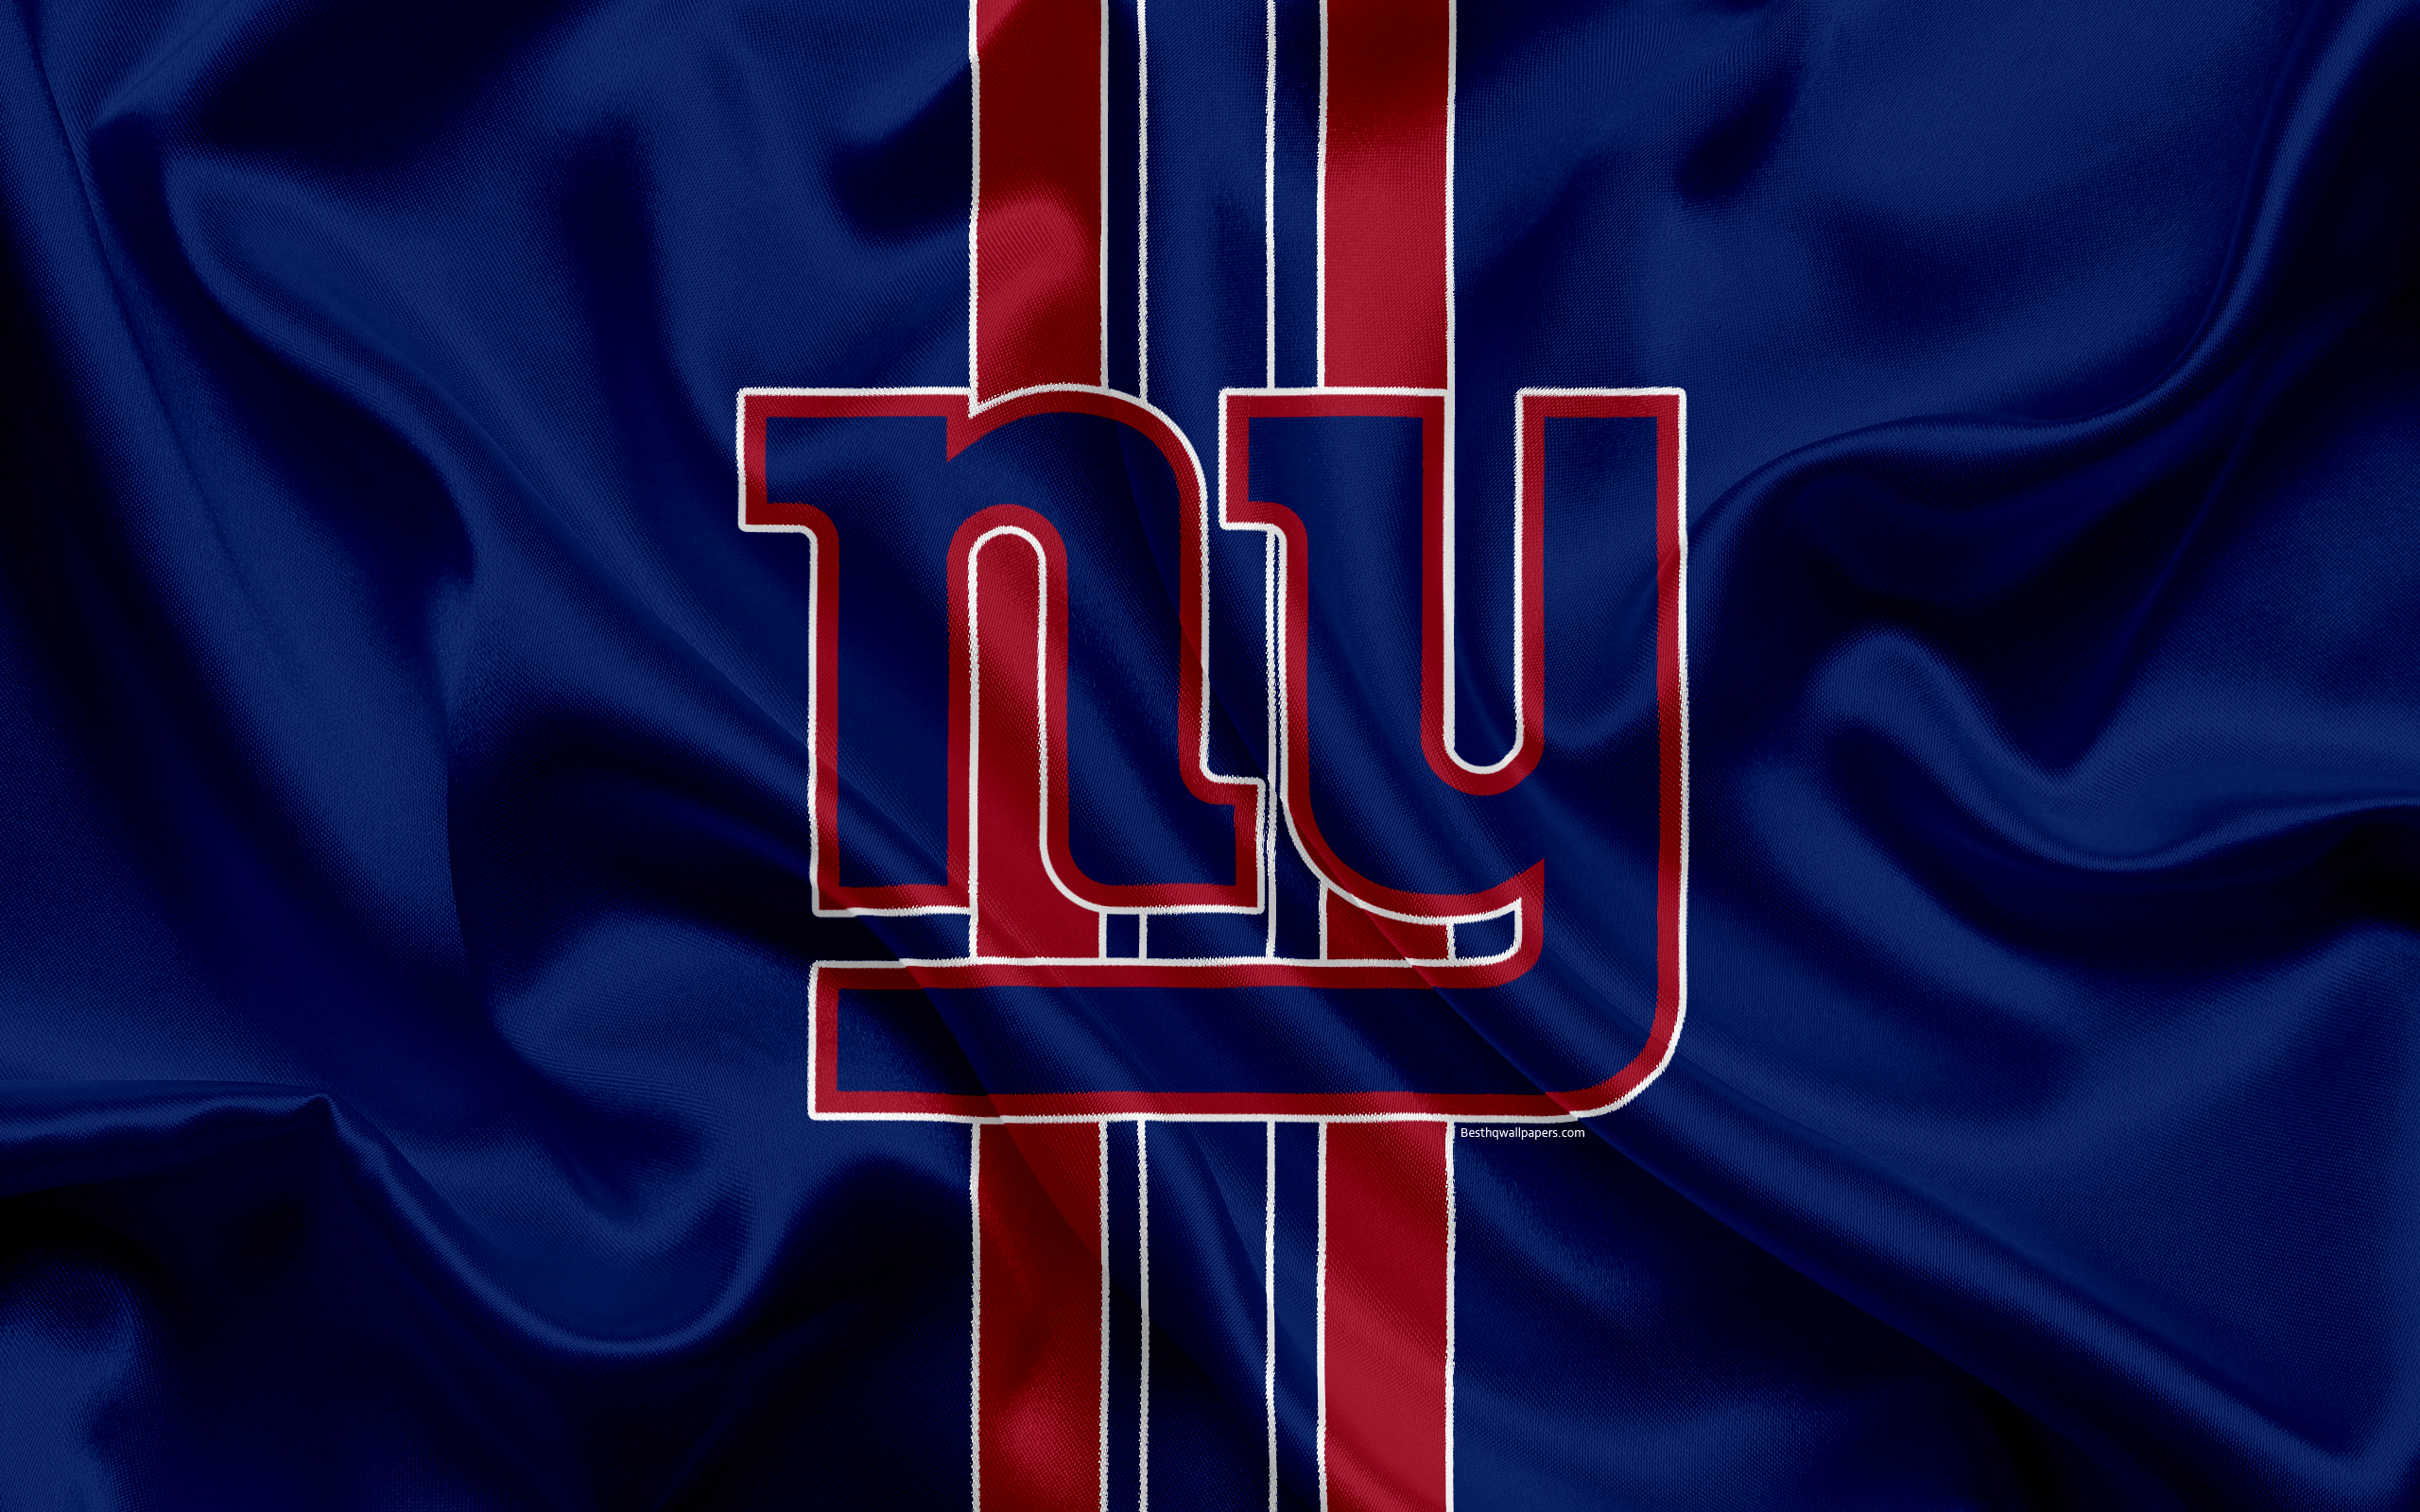 2560x1600 New York Giants Desktop Wallpaper posted by Ethan Tremblay